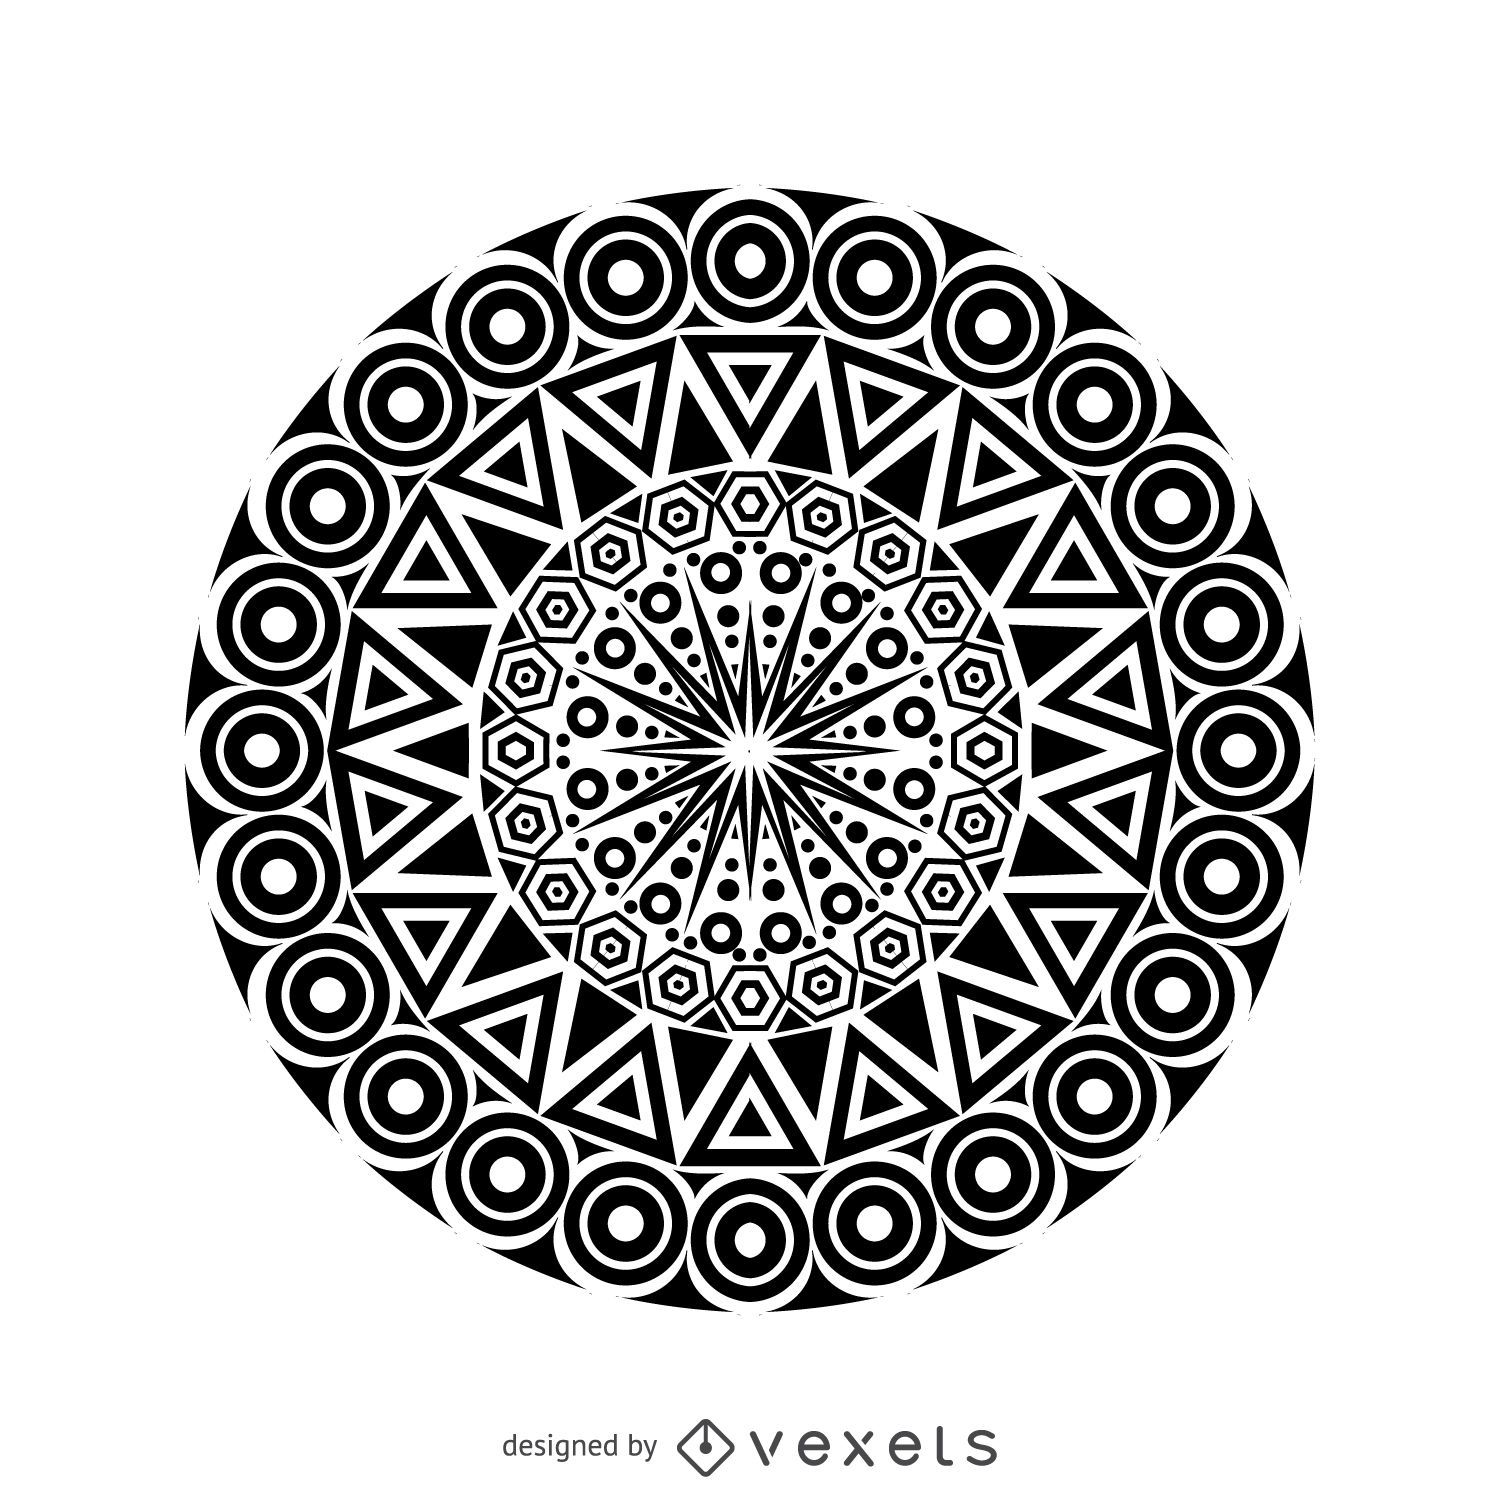 100,000 Tribal Vector Images